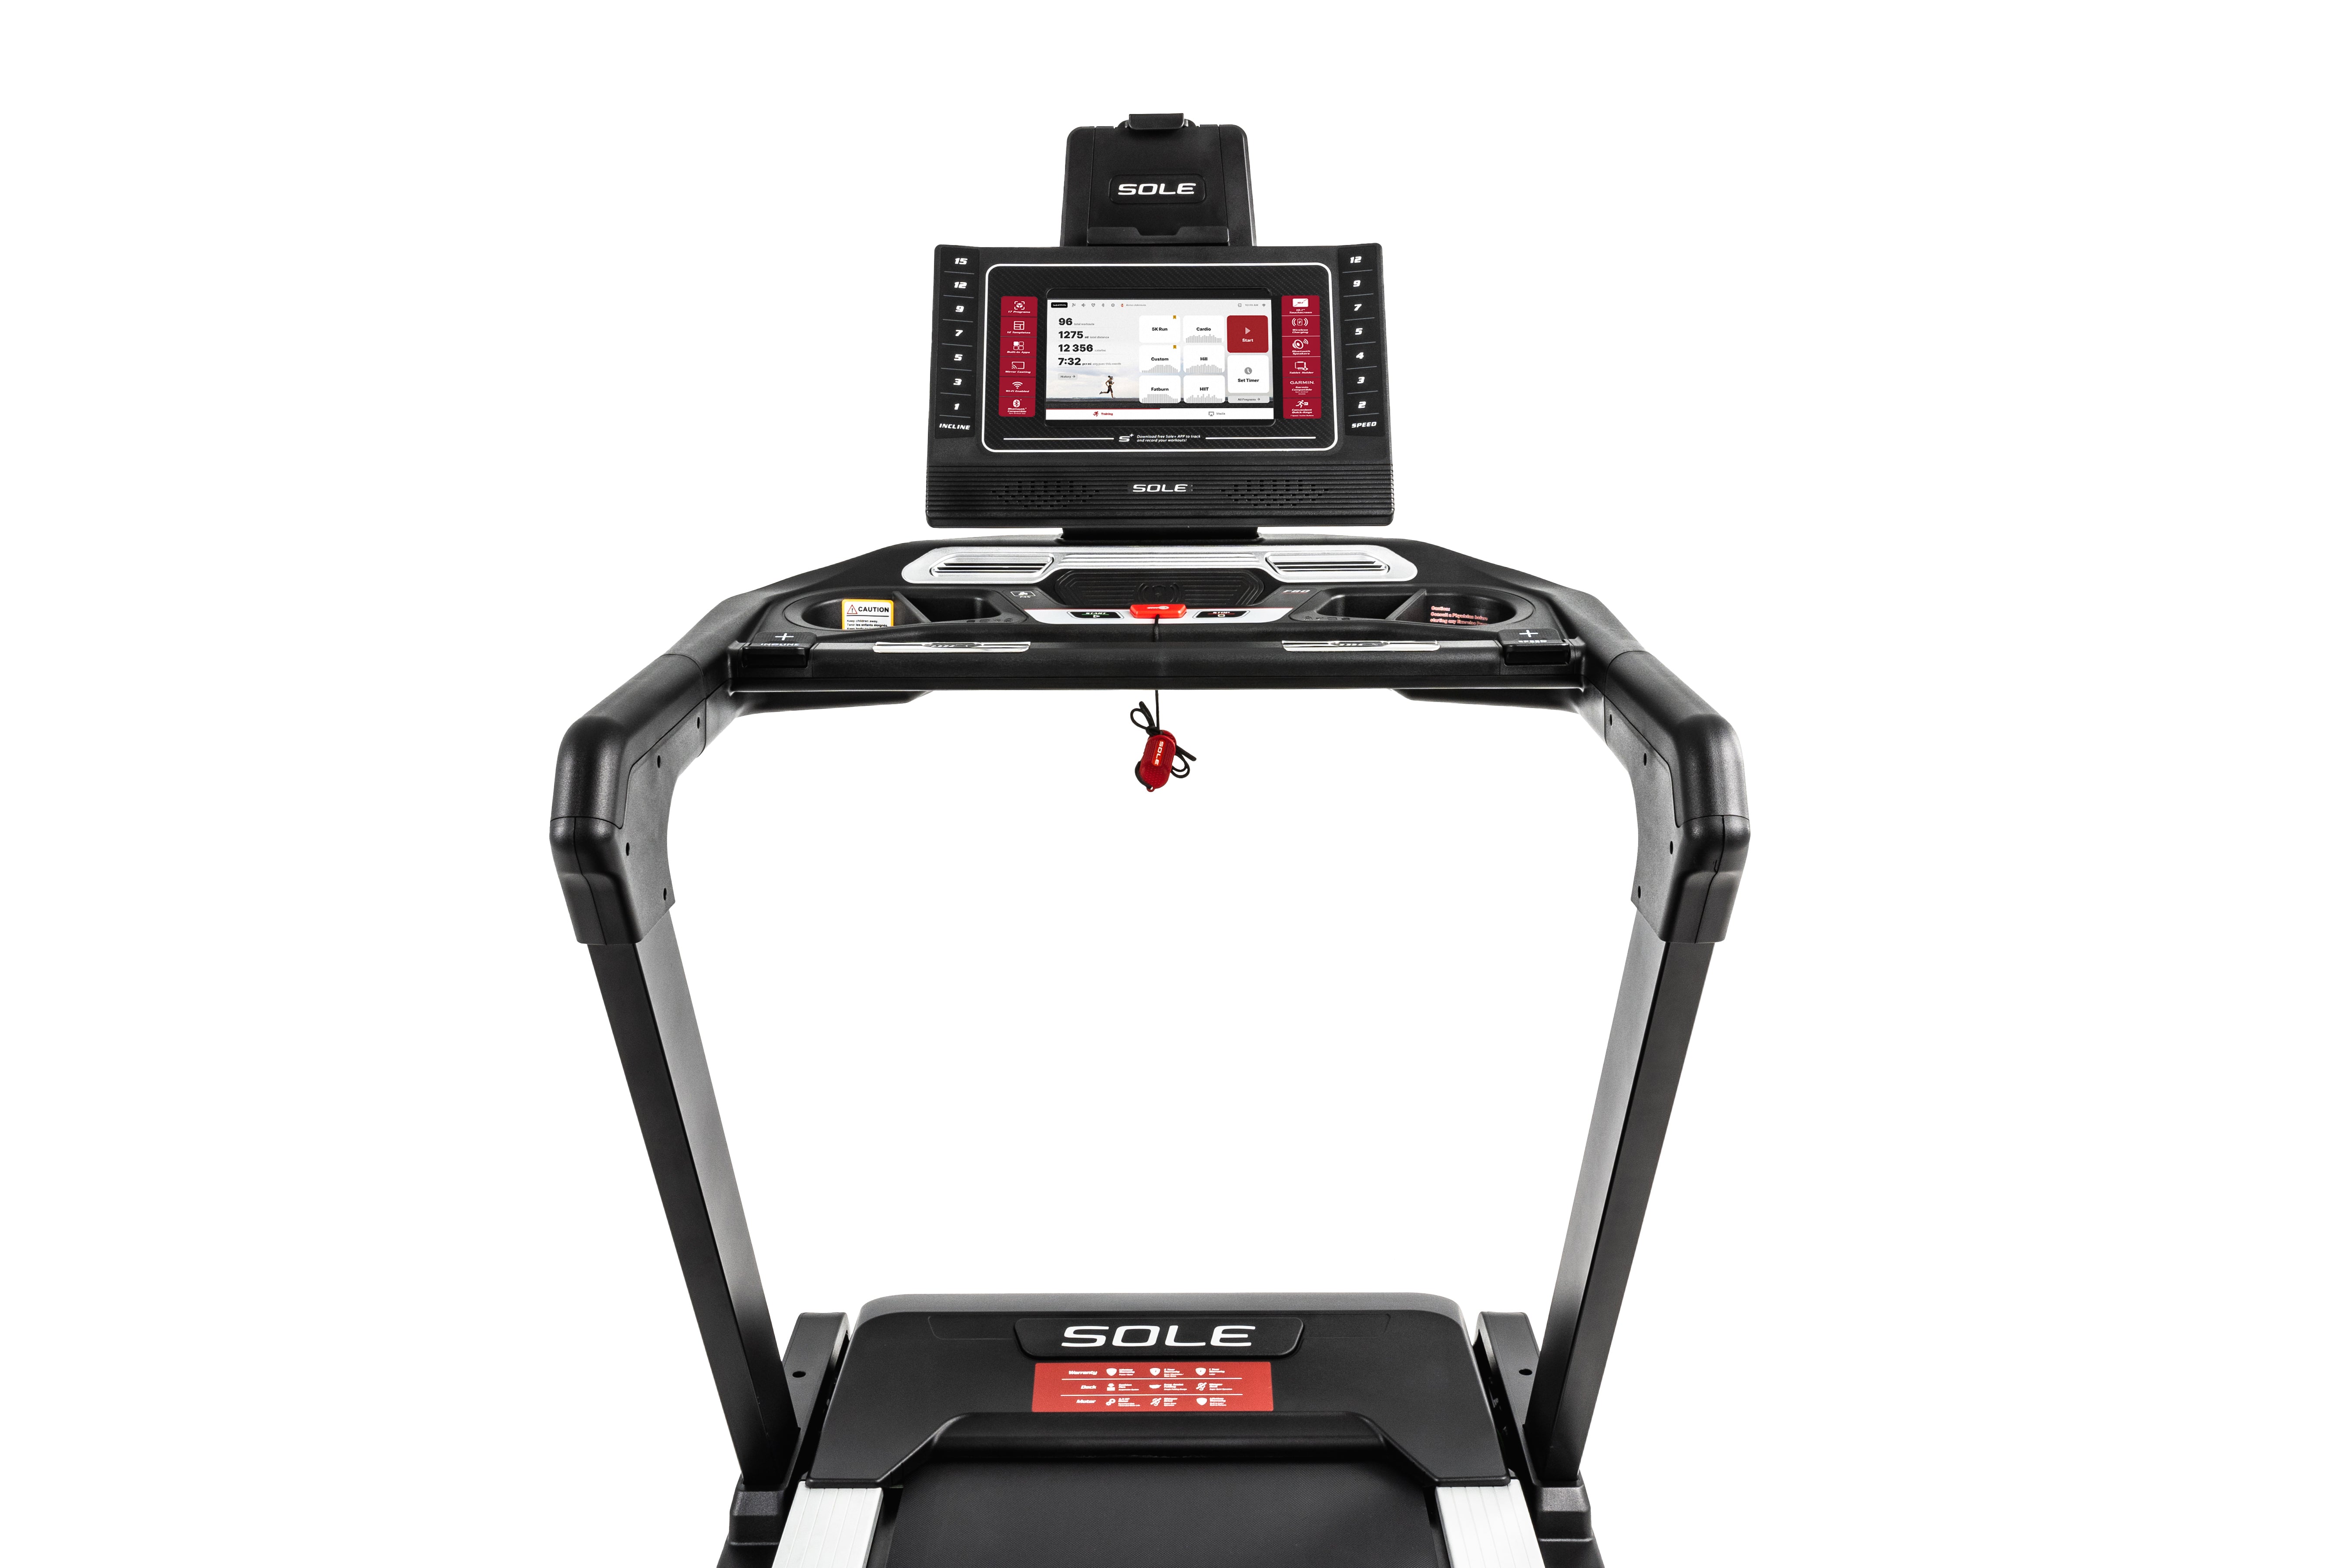 "Front view of the Sole F80 treadmill, showcasing its large digital console with workout metrics, integrated speakers, and Sole branding. A red safety key hangs from the front of the console. The handrails curve gracefully, and the treadmill belt features another Sole logo at the front end.